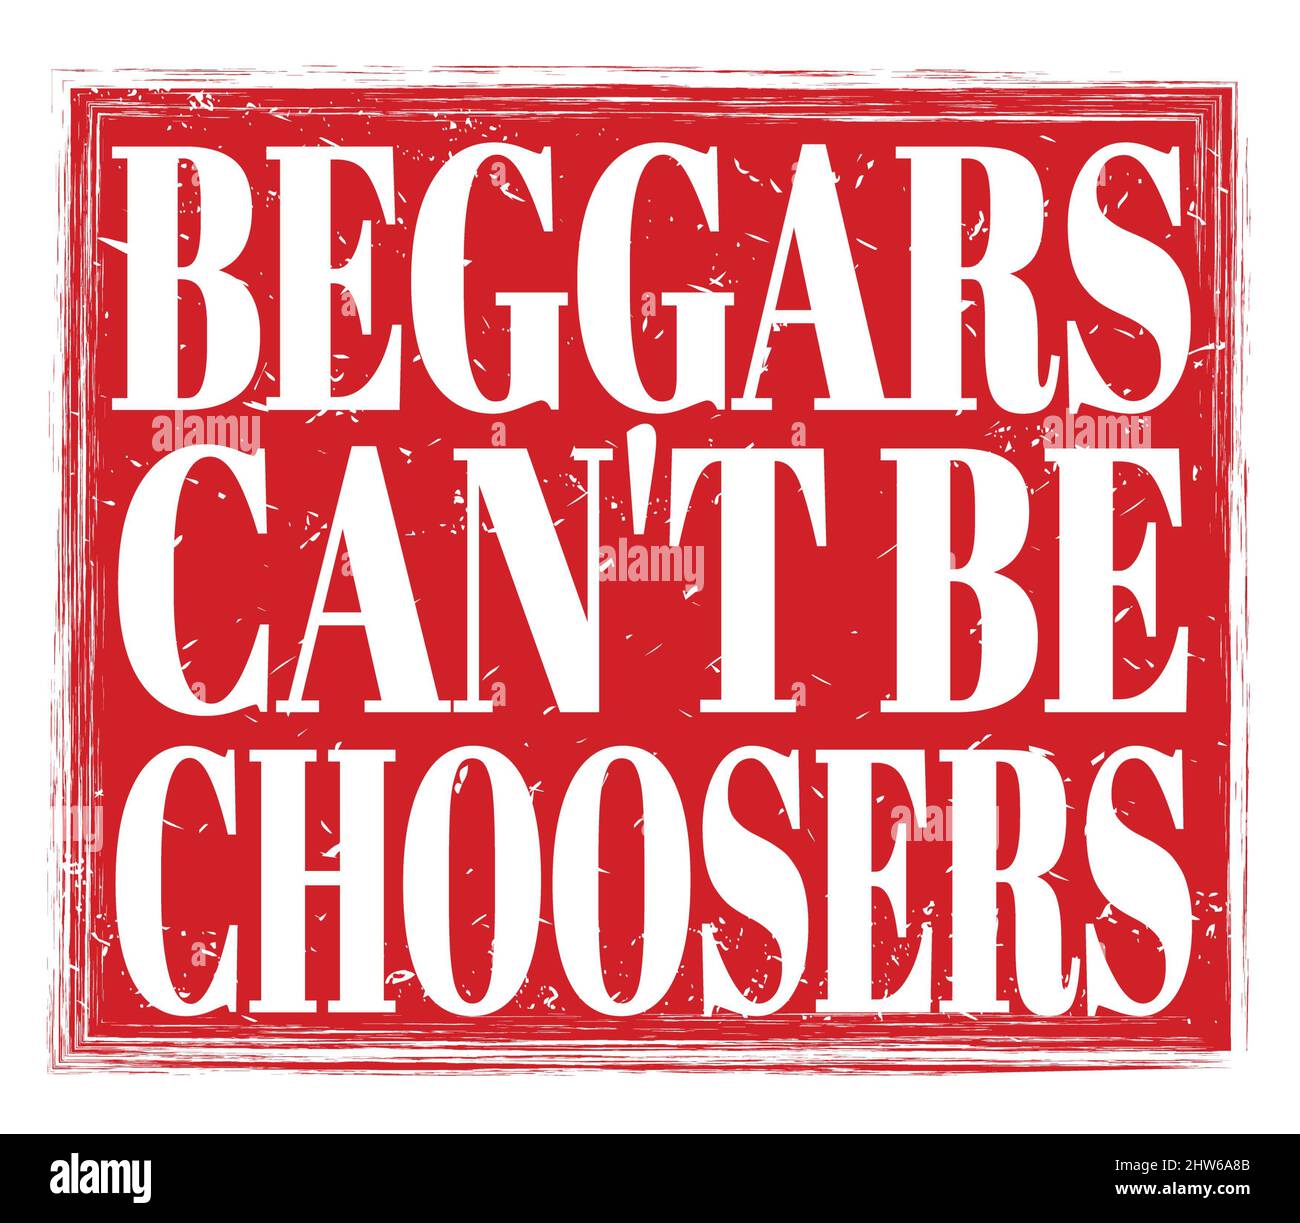 BEGGARS CAN'T BE CHOOSERS, written on red grungy stamp sign Stock Photo -  Alamy